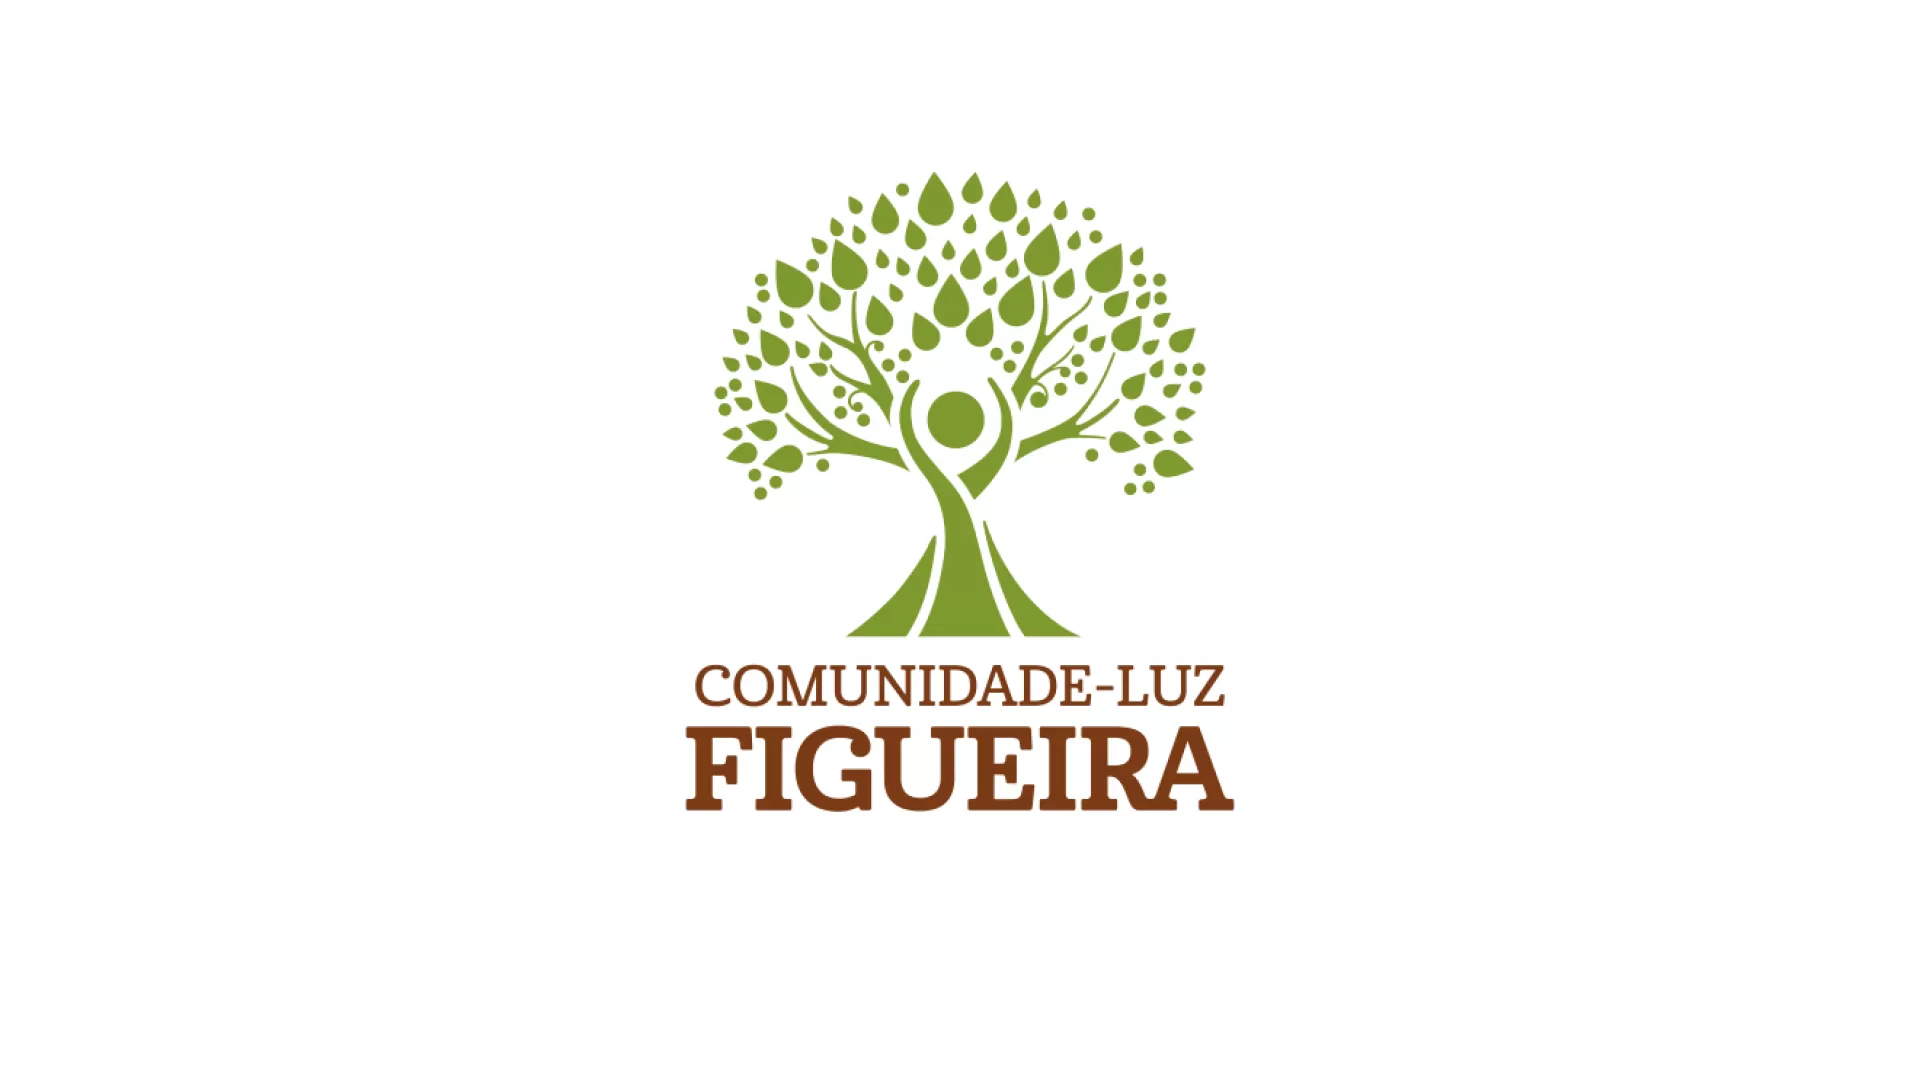 New Logo of the Light Community of Figueira